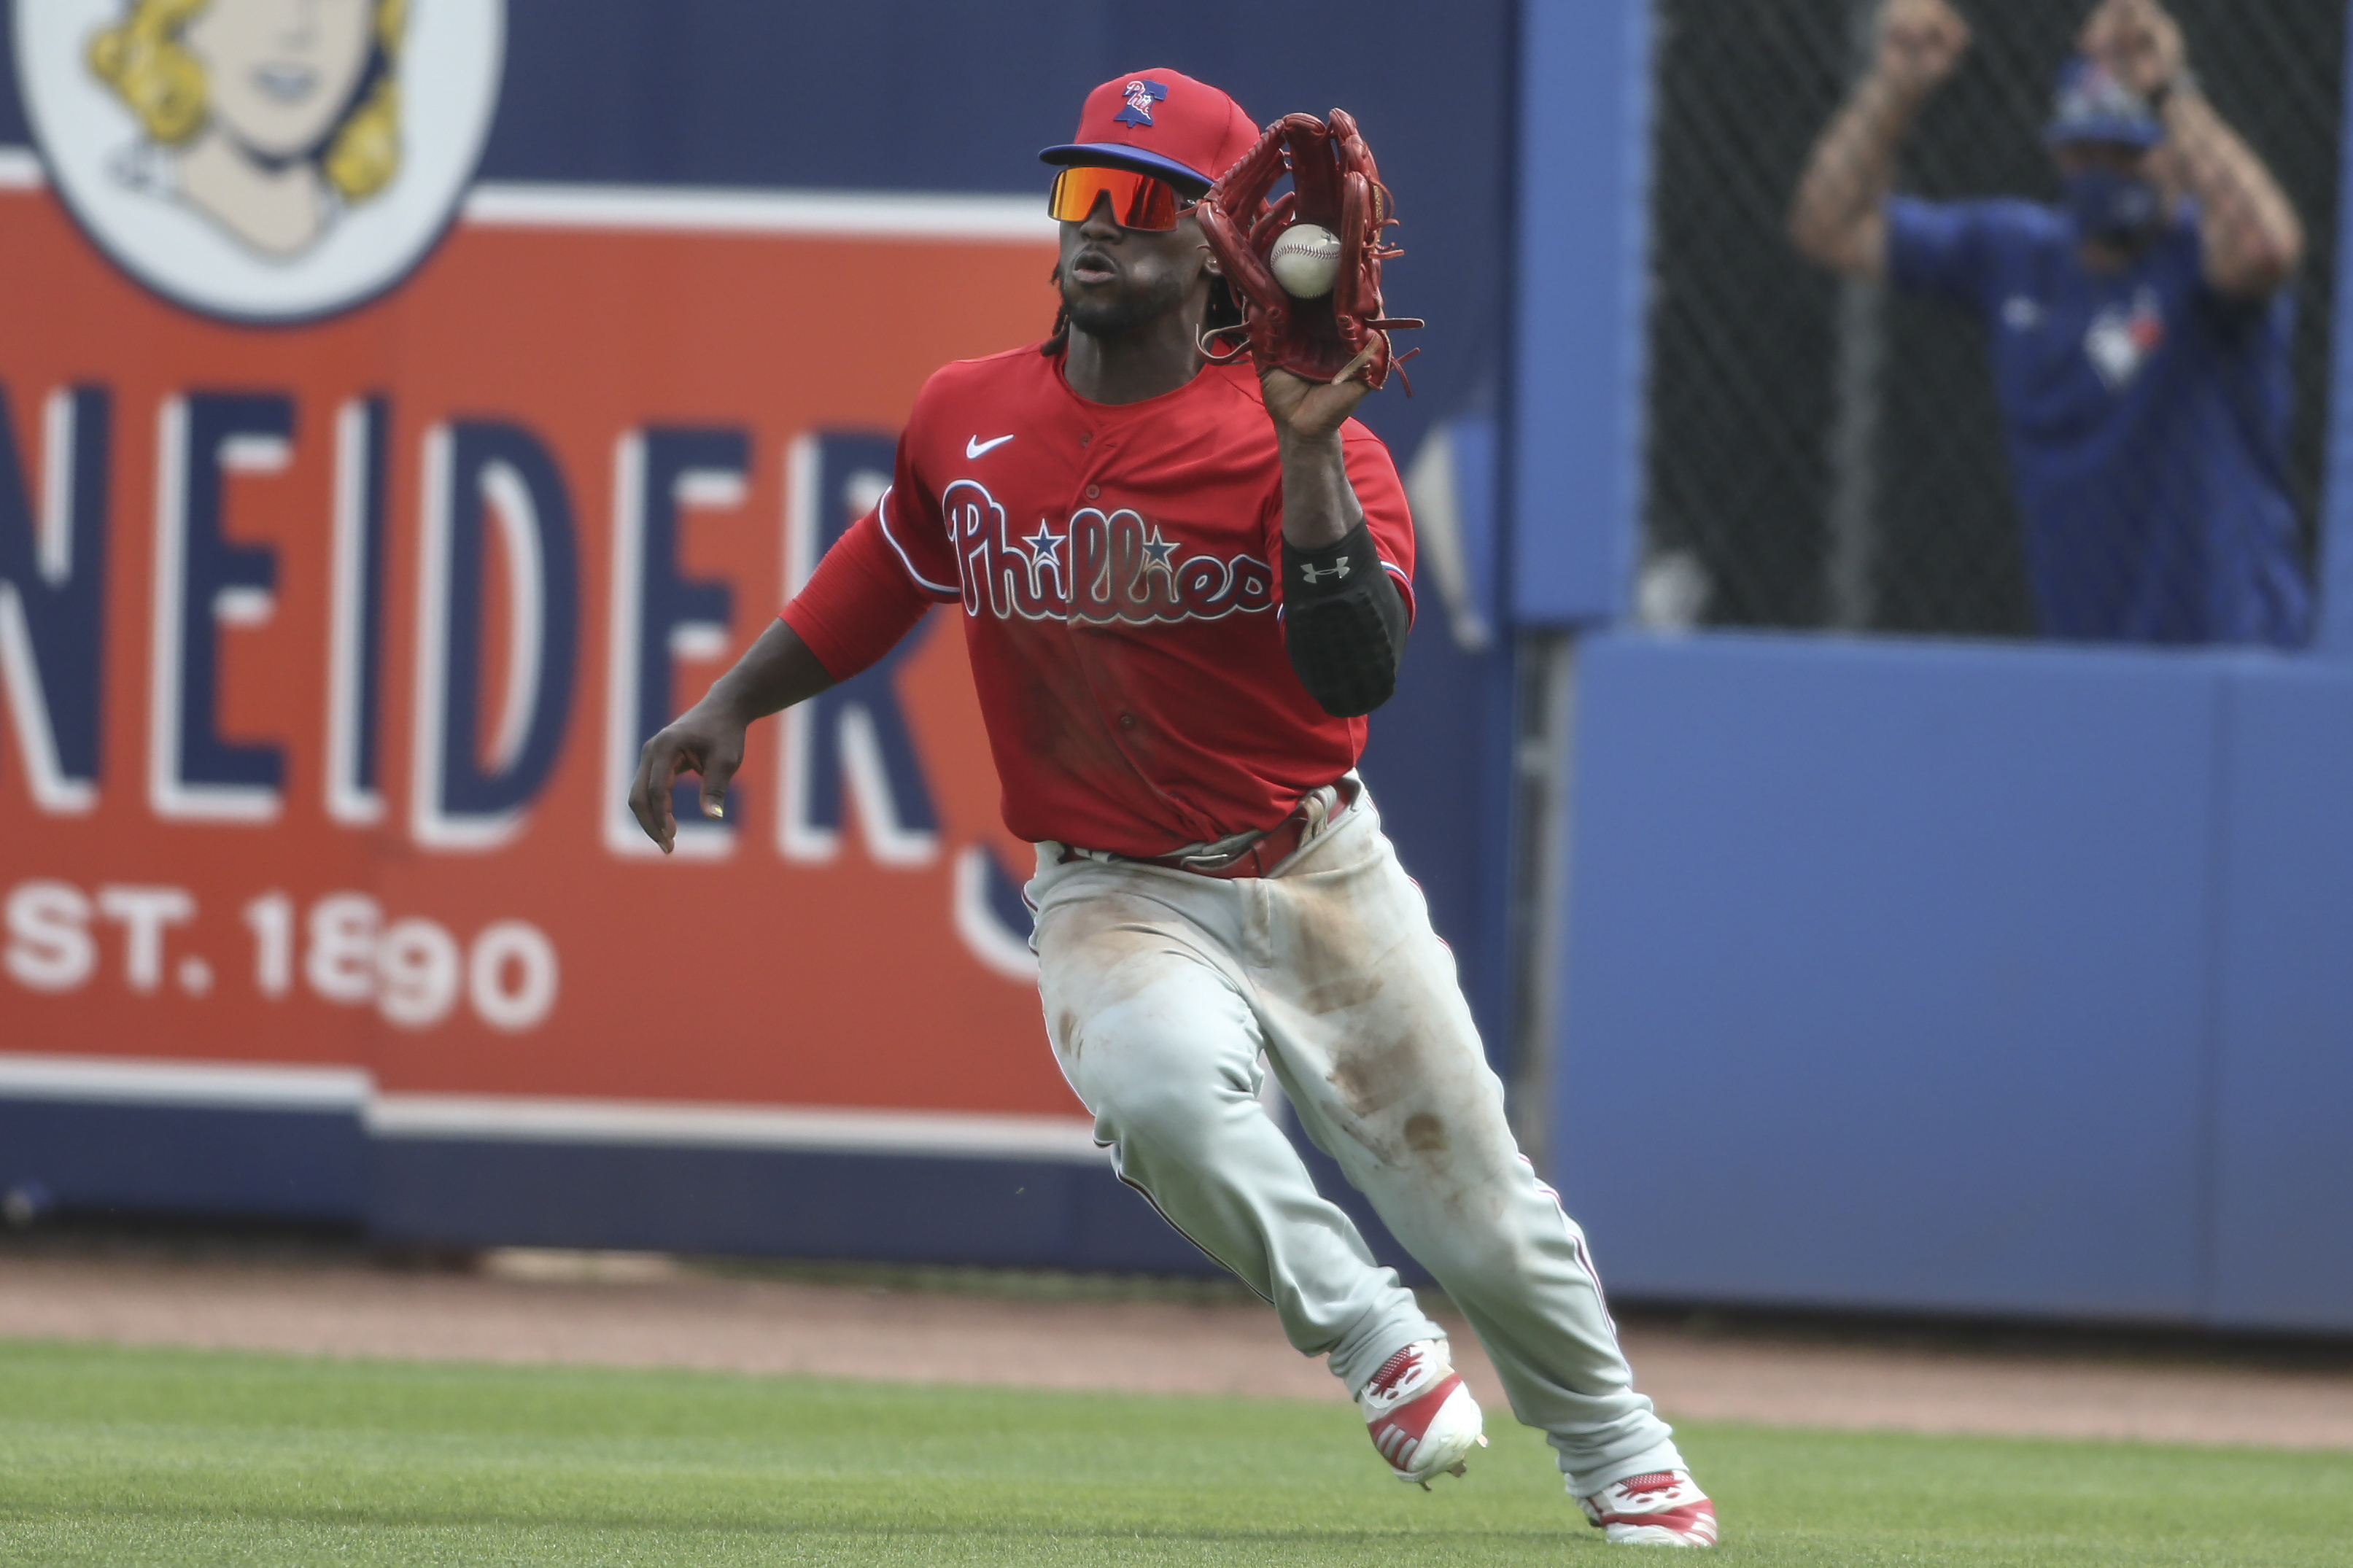 Odubel Herrera Made One of the Greatest Catches in Citizens Bank